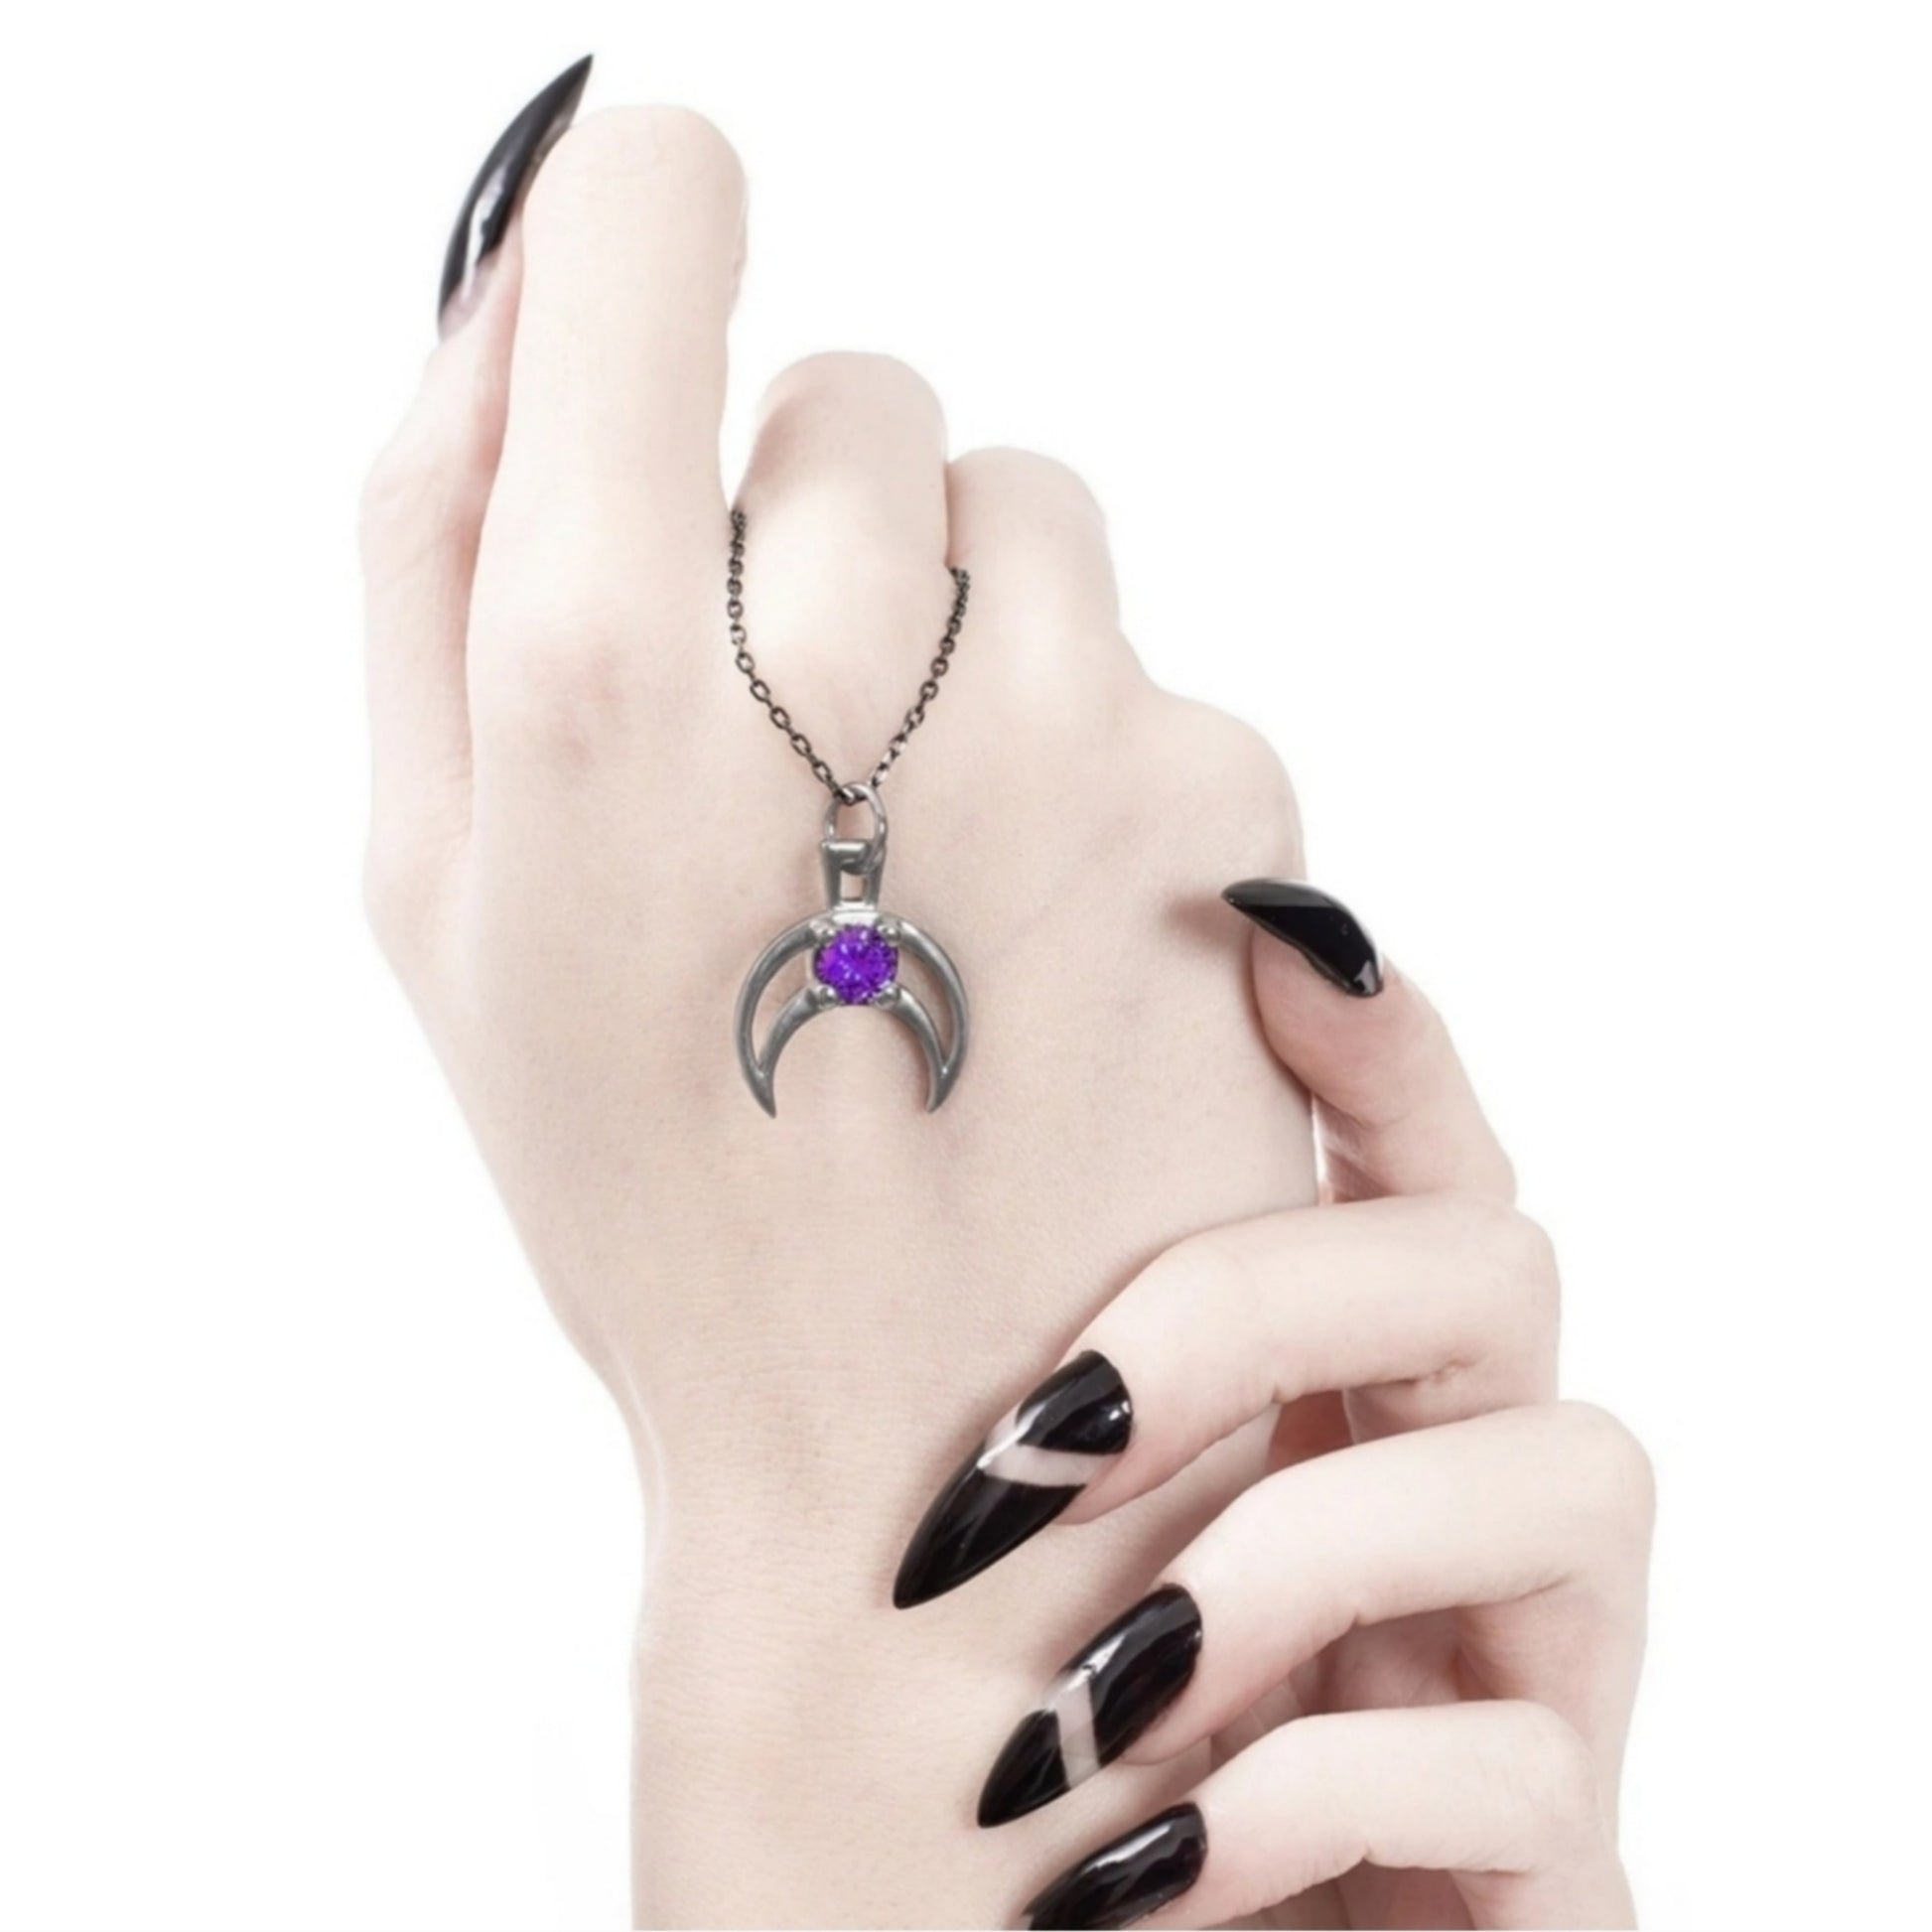 Mirror Stainless Steel Necklace | Silver Rhea Pendant Amethyst - Rogue + Wolf - Necklaces